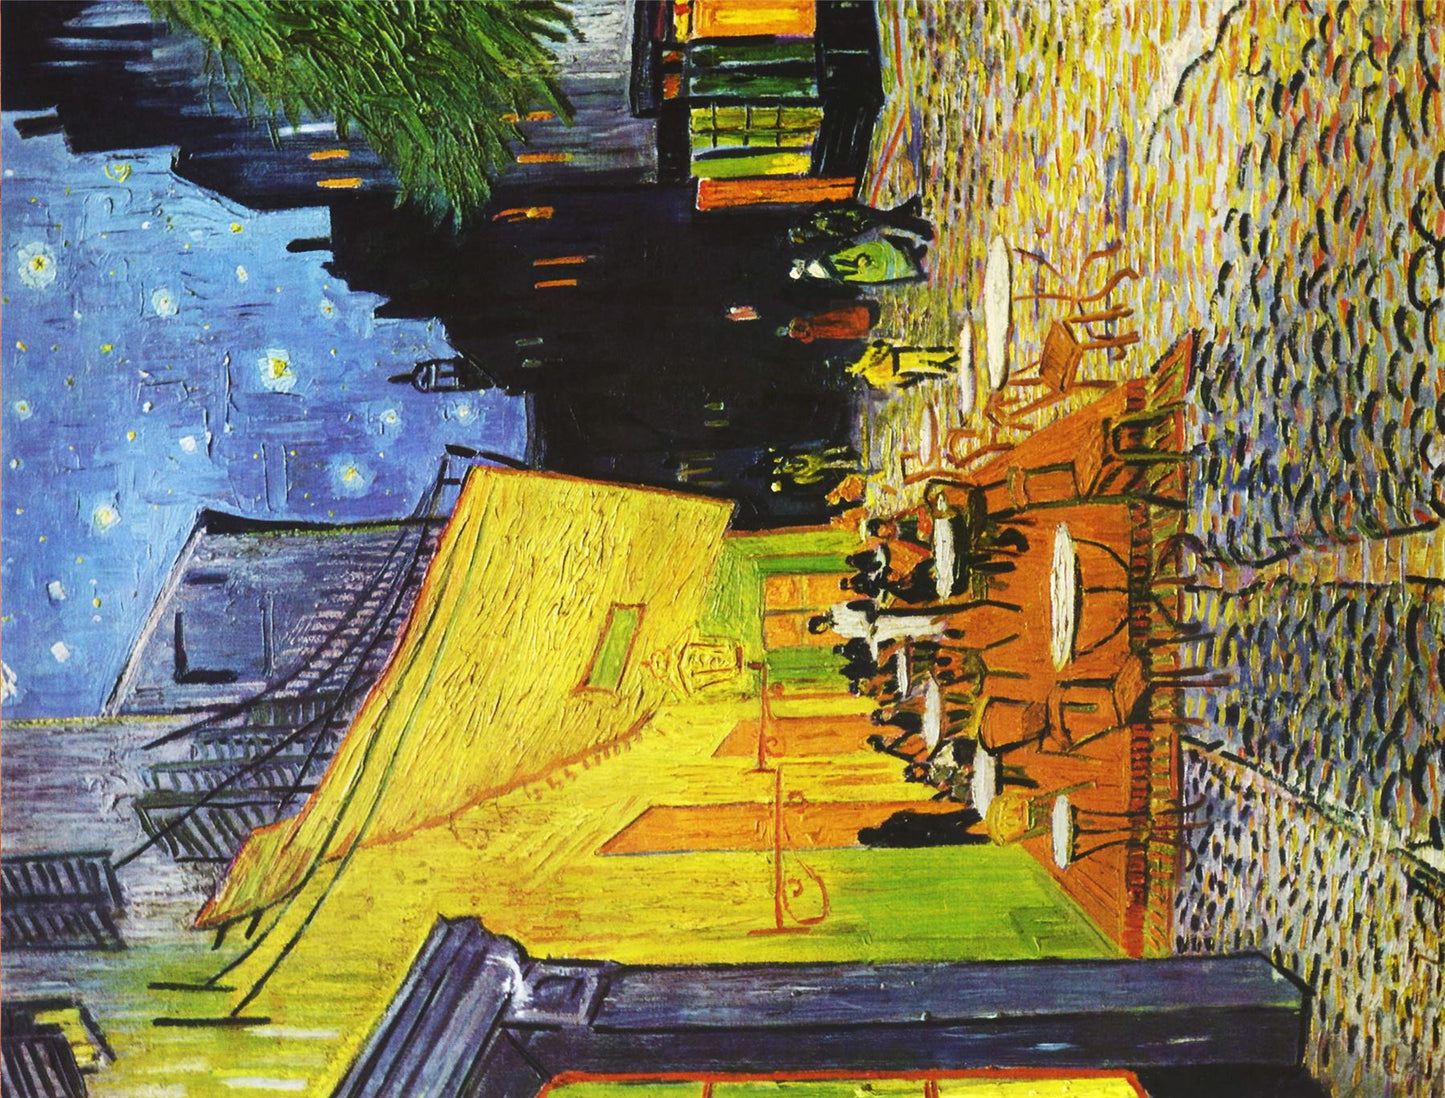 Cafe Terrace at Night by Van Gogh - 500 pc. jigsaw puzzle